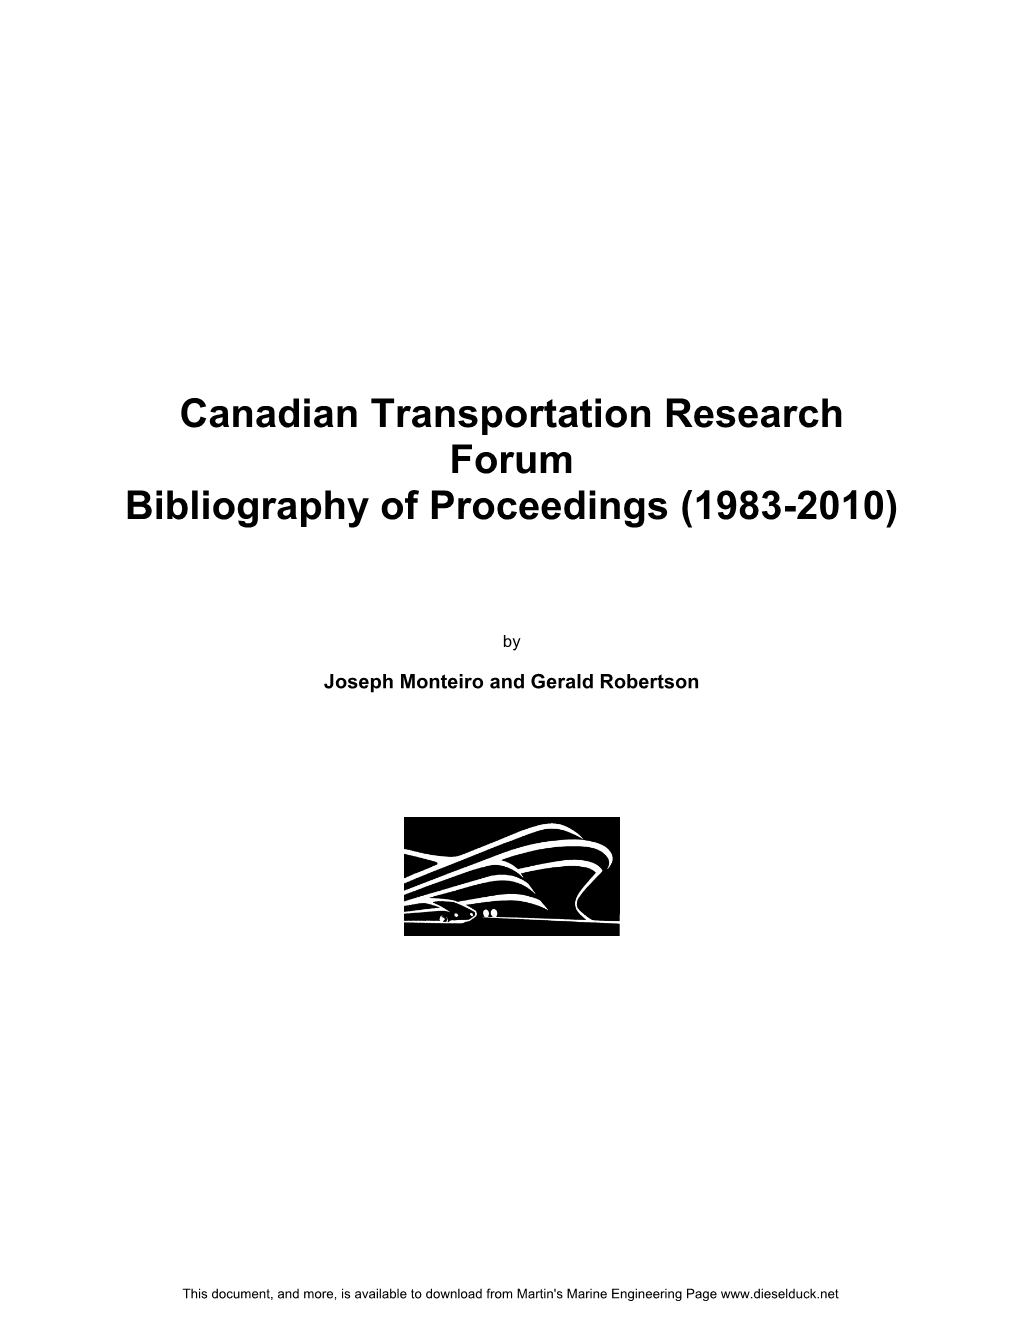 Canadian Transportation Research Forum Bibliography of Proceedings (1983-2010)